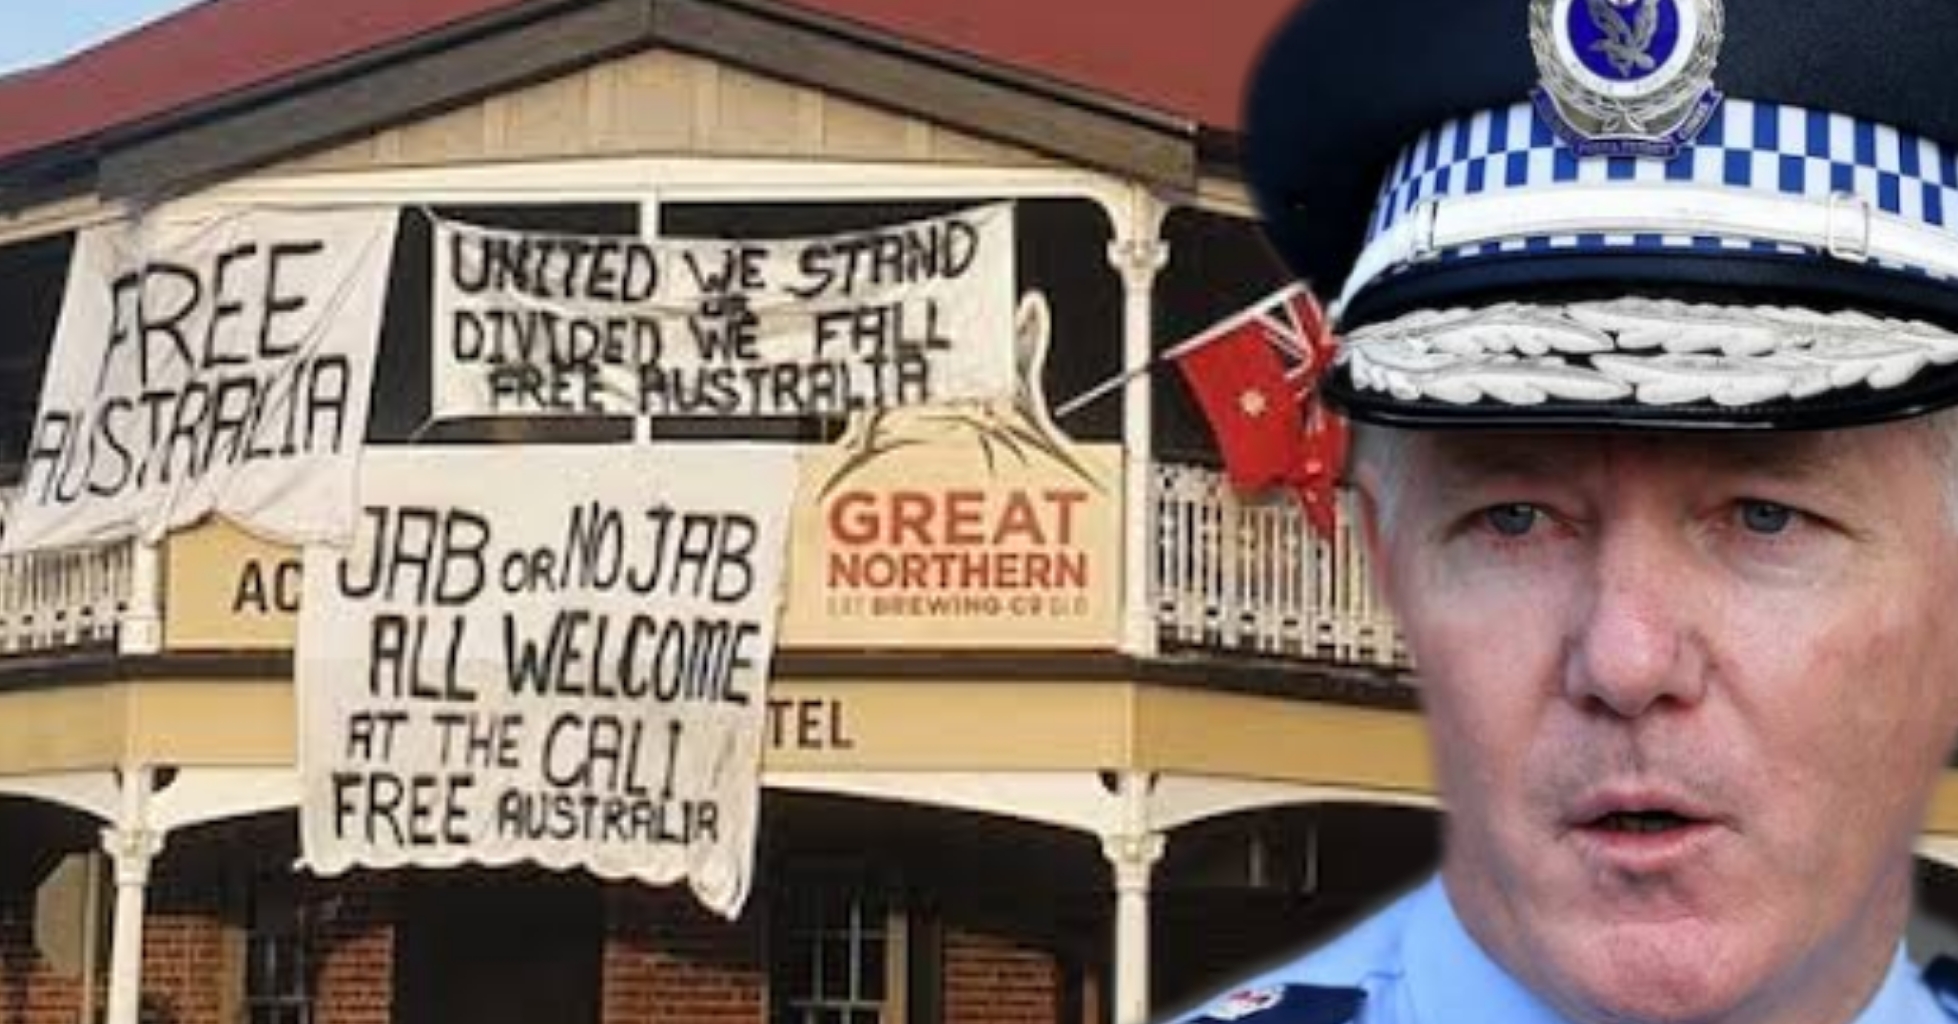 Read more about the article HUNTER VALLEY FREEDOM HOTEL SHUTDOWN.